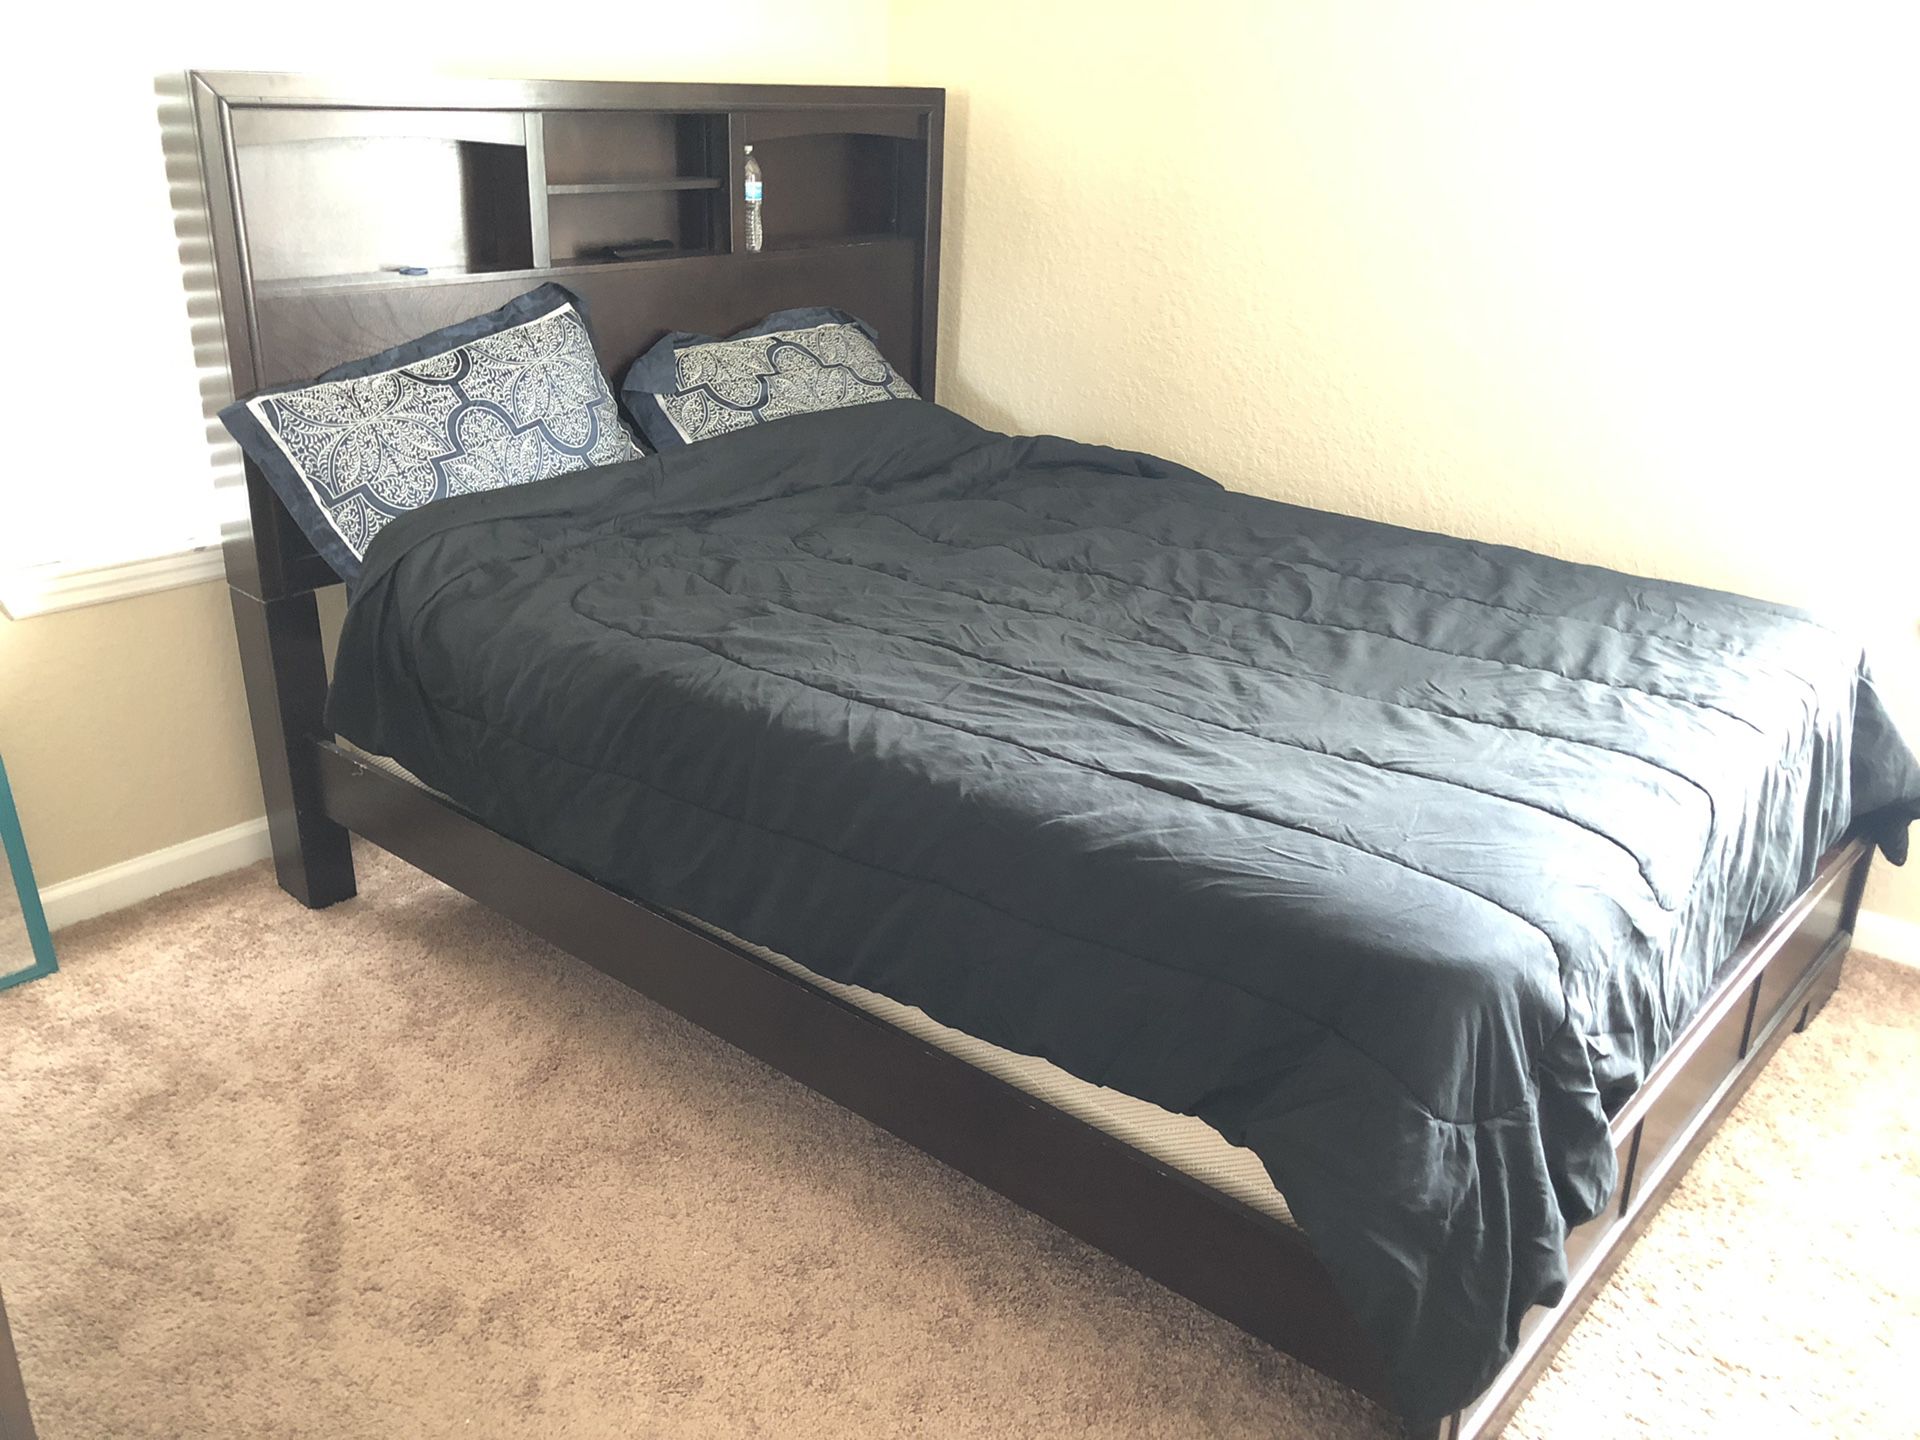 Queen Bedroom set with mattress and box spring